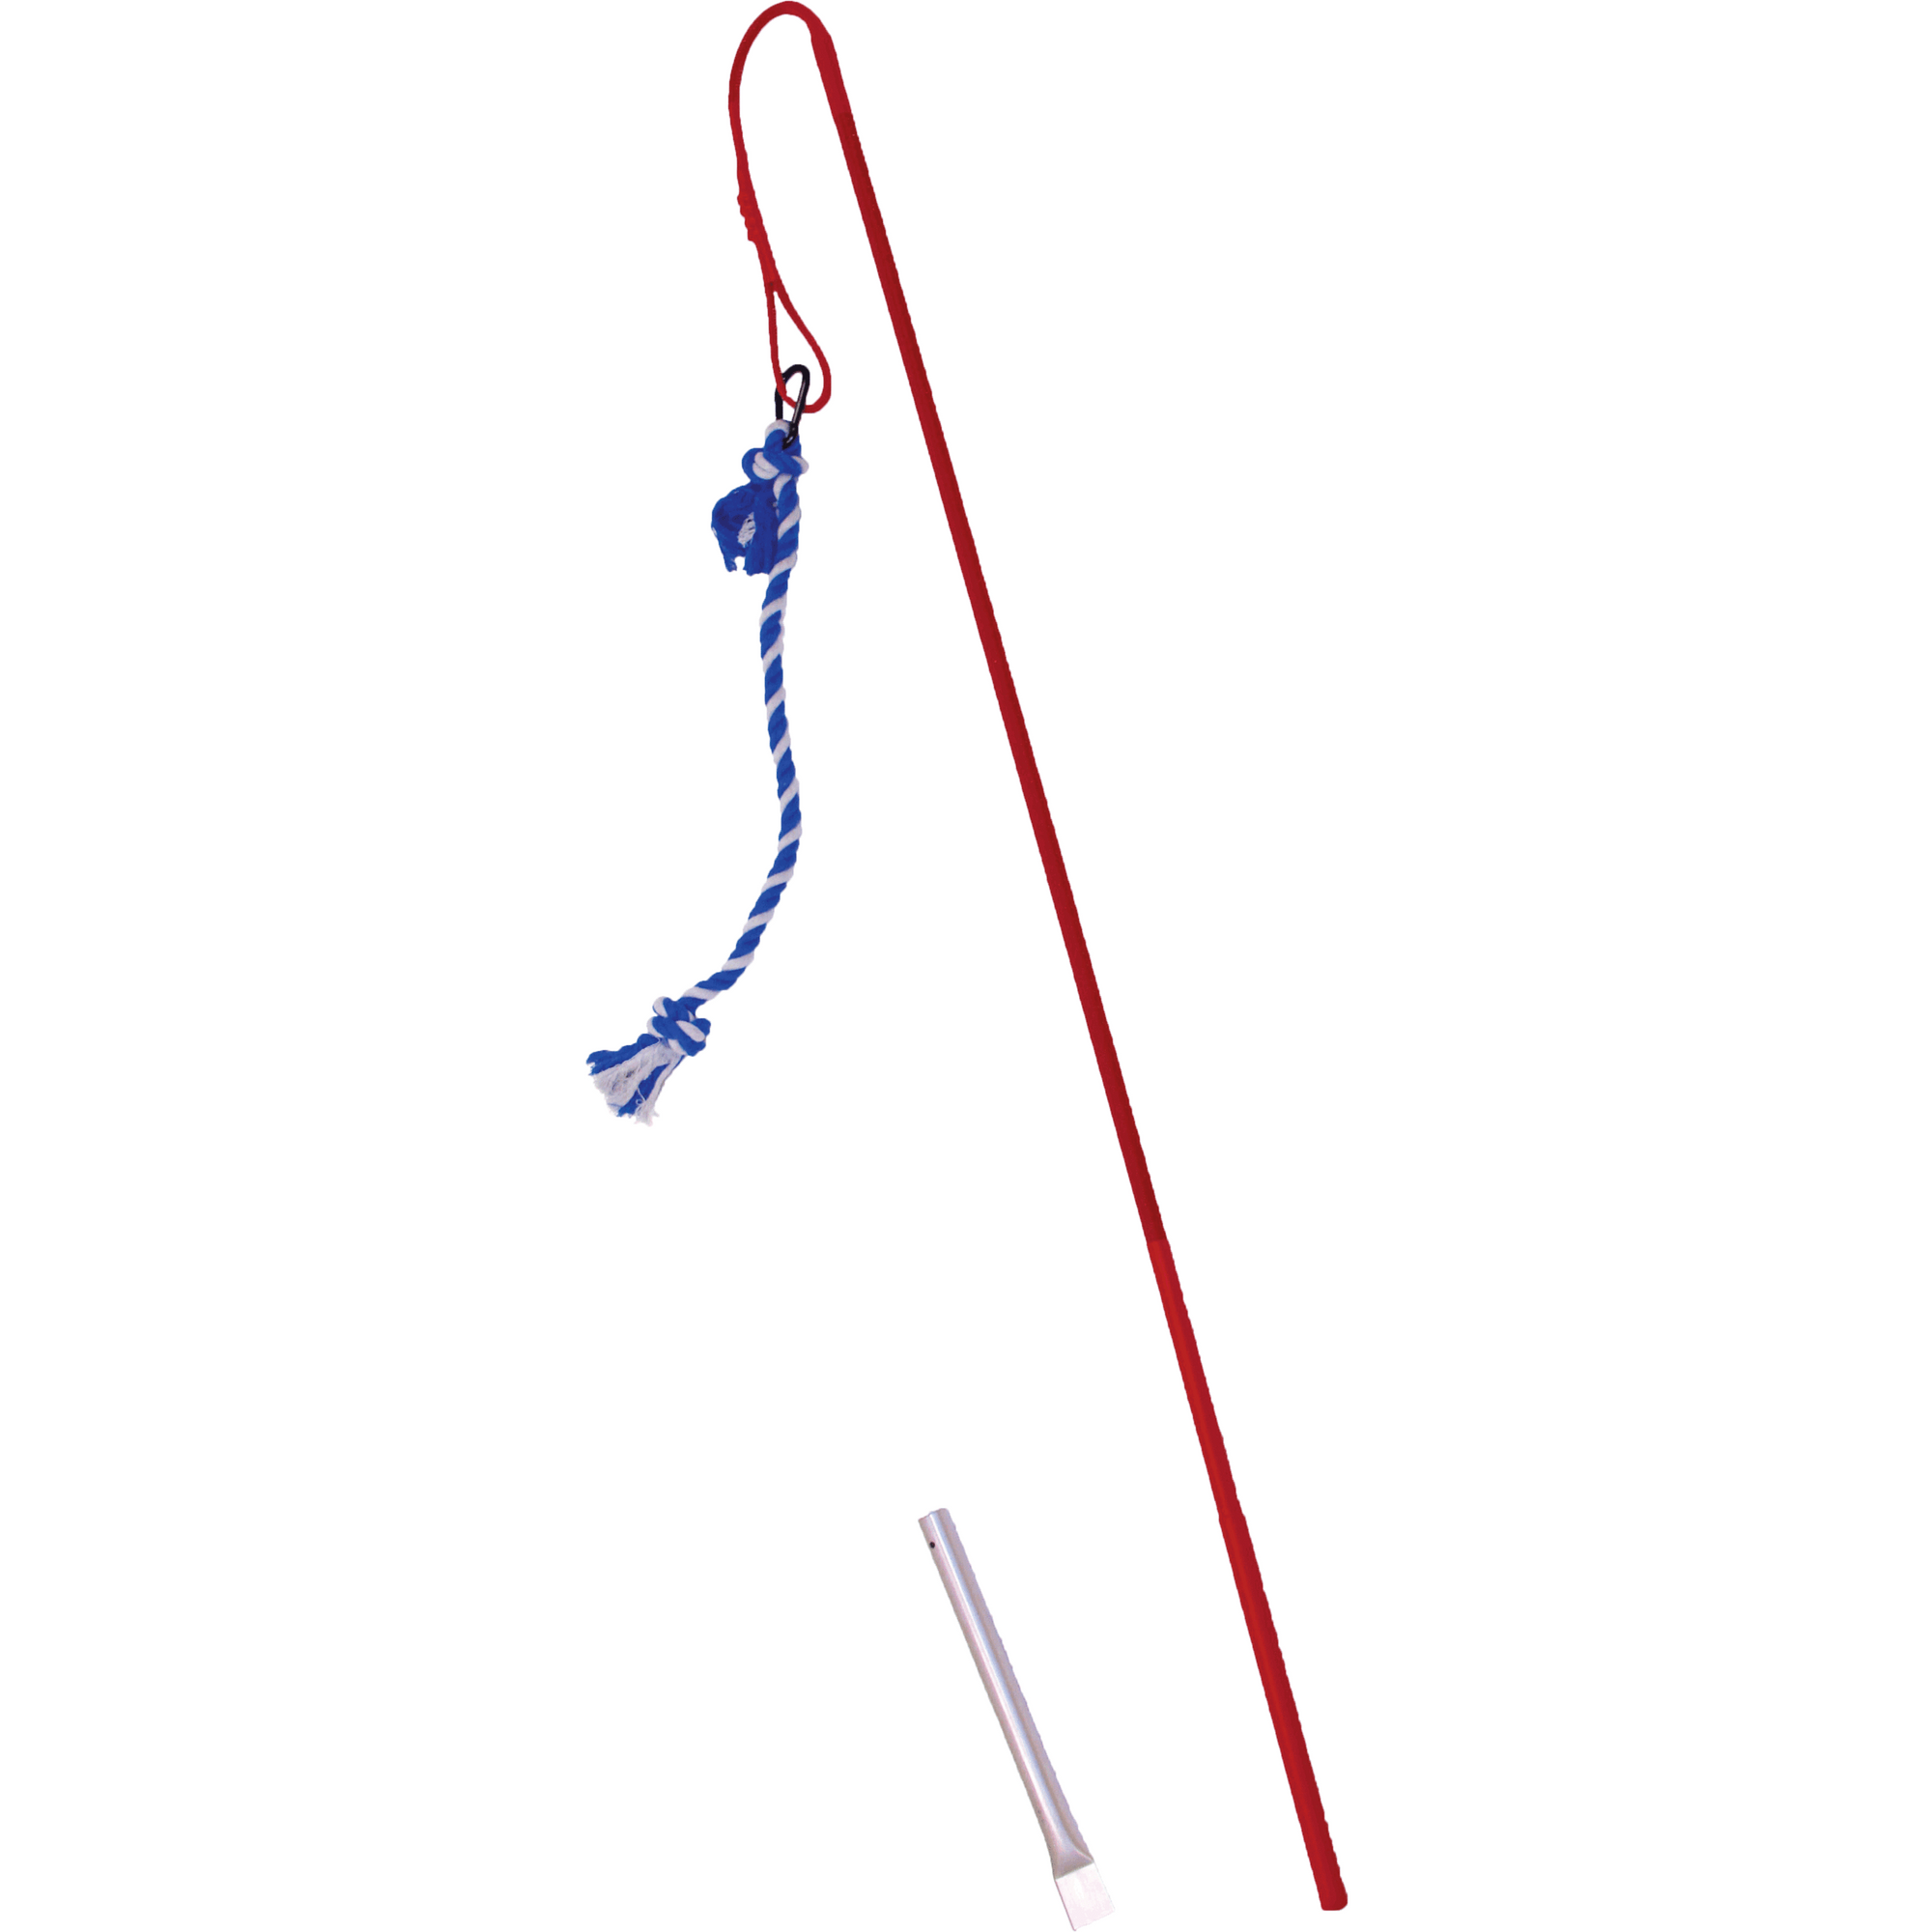 Tether Tug - Small Tether Tug (For dogs under 35 pounds)